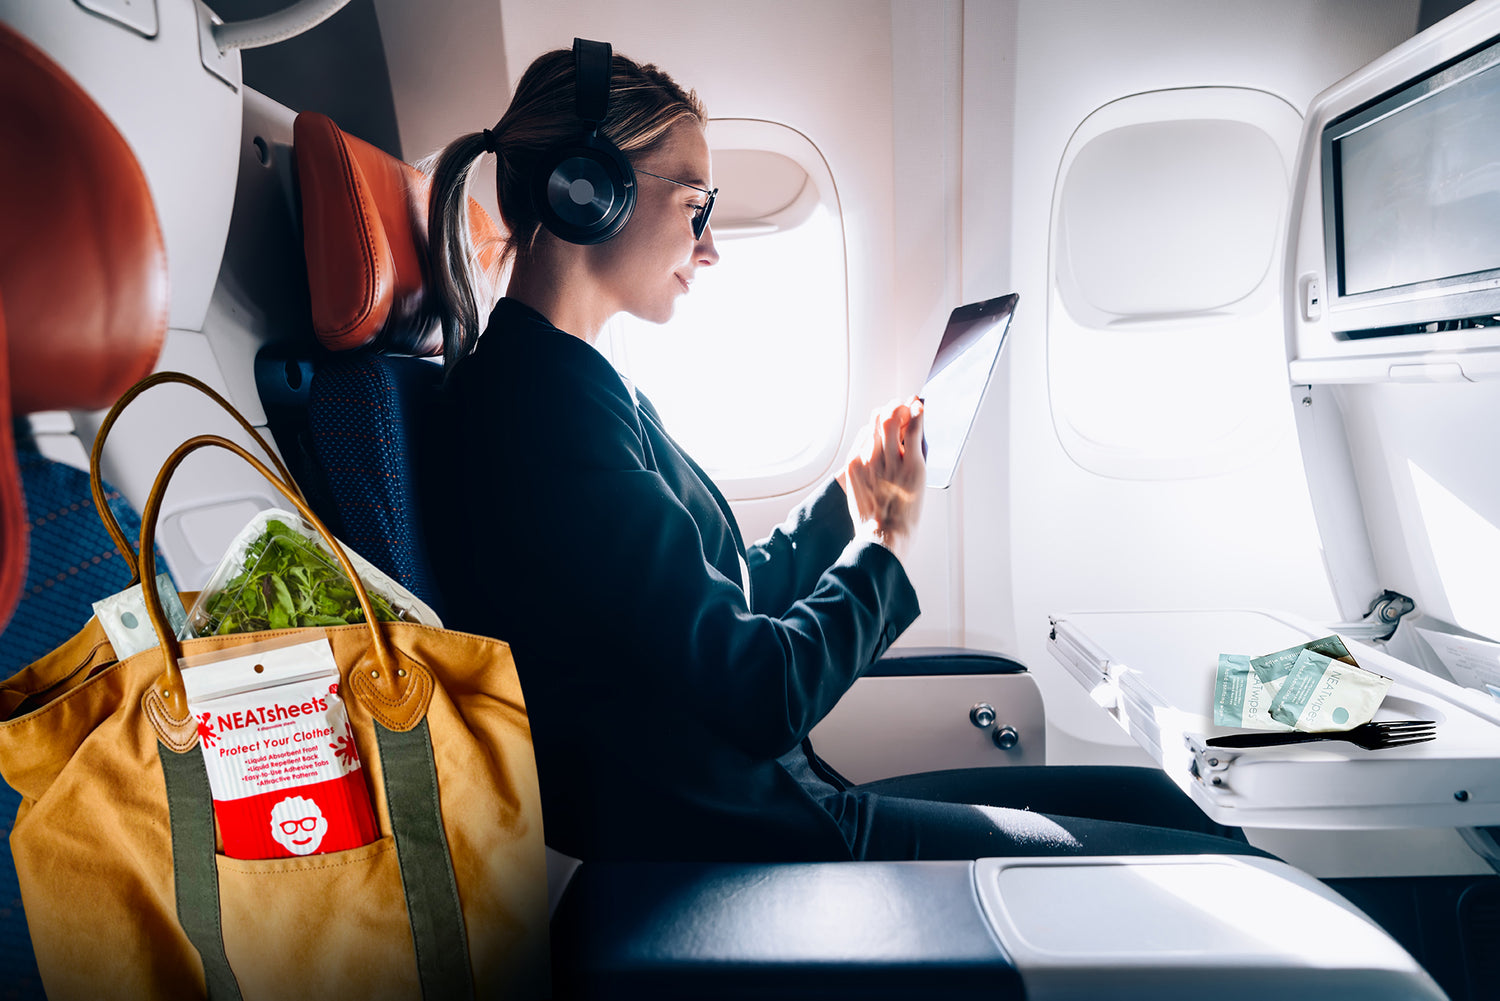 A business woman on plane with NEATsheets and NEATwipes.